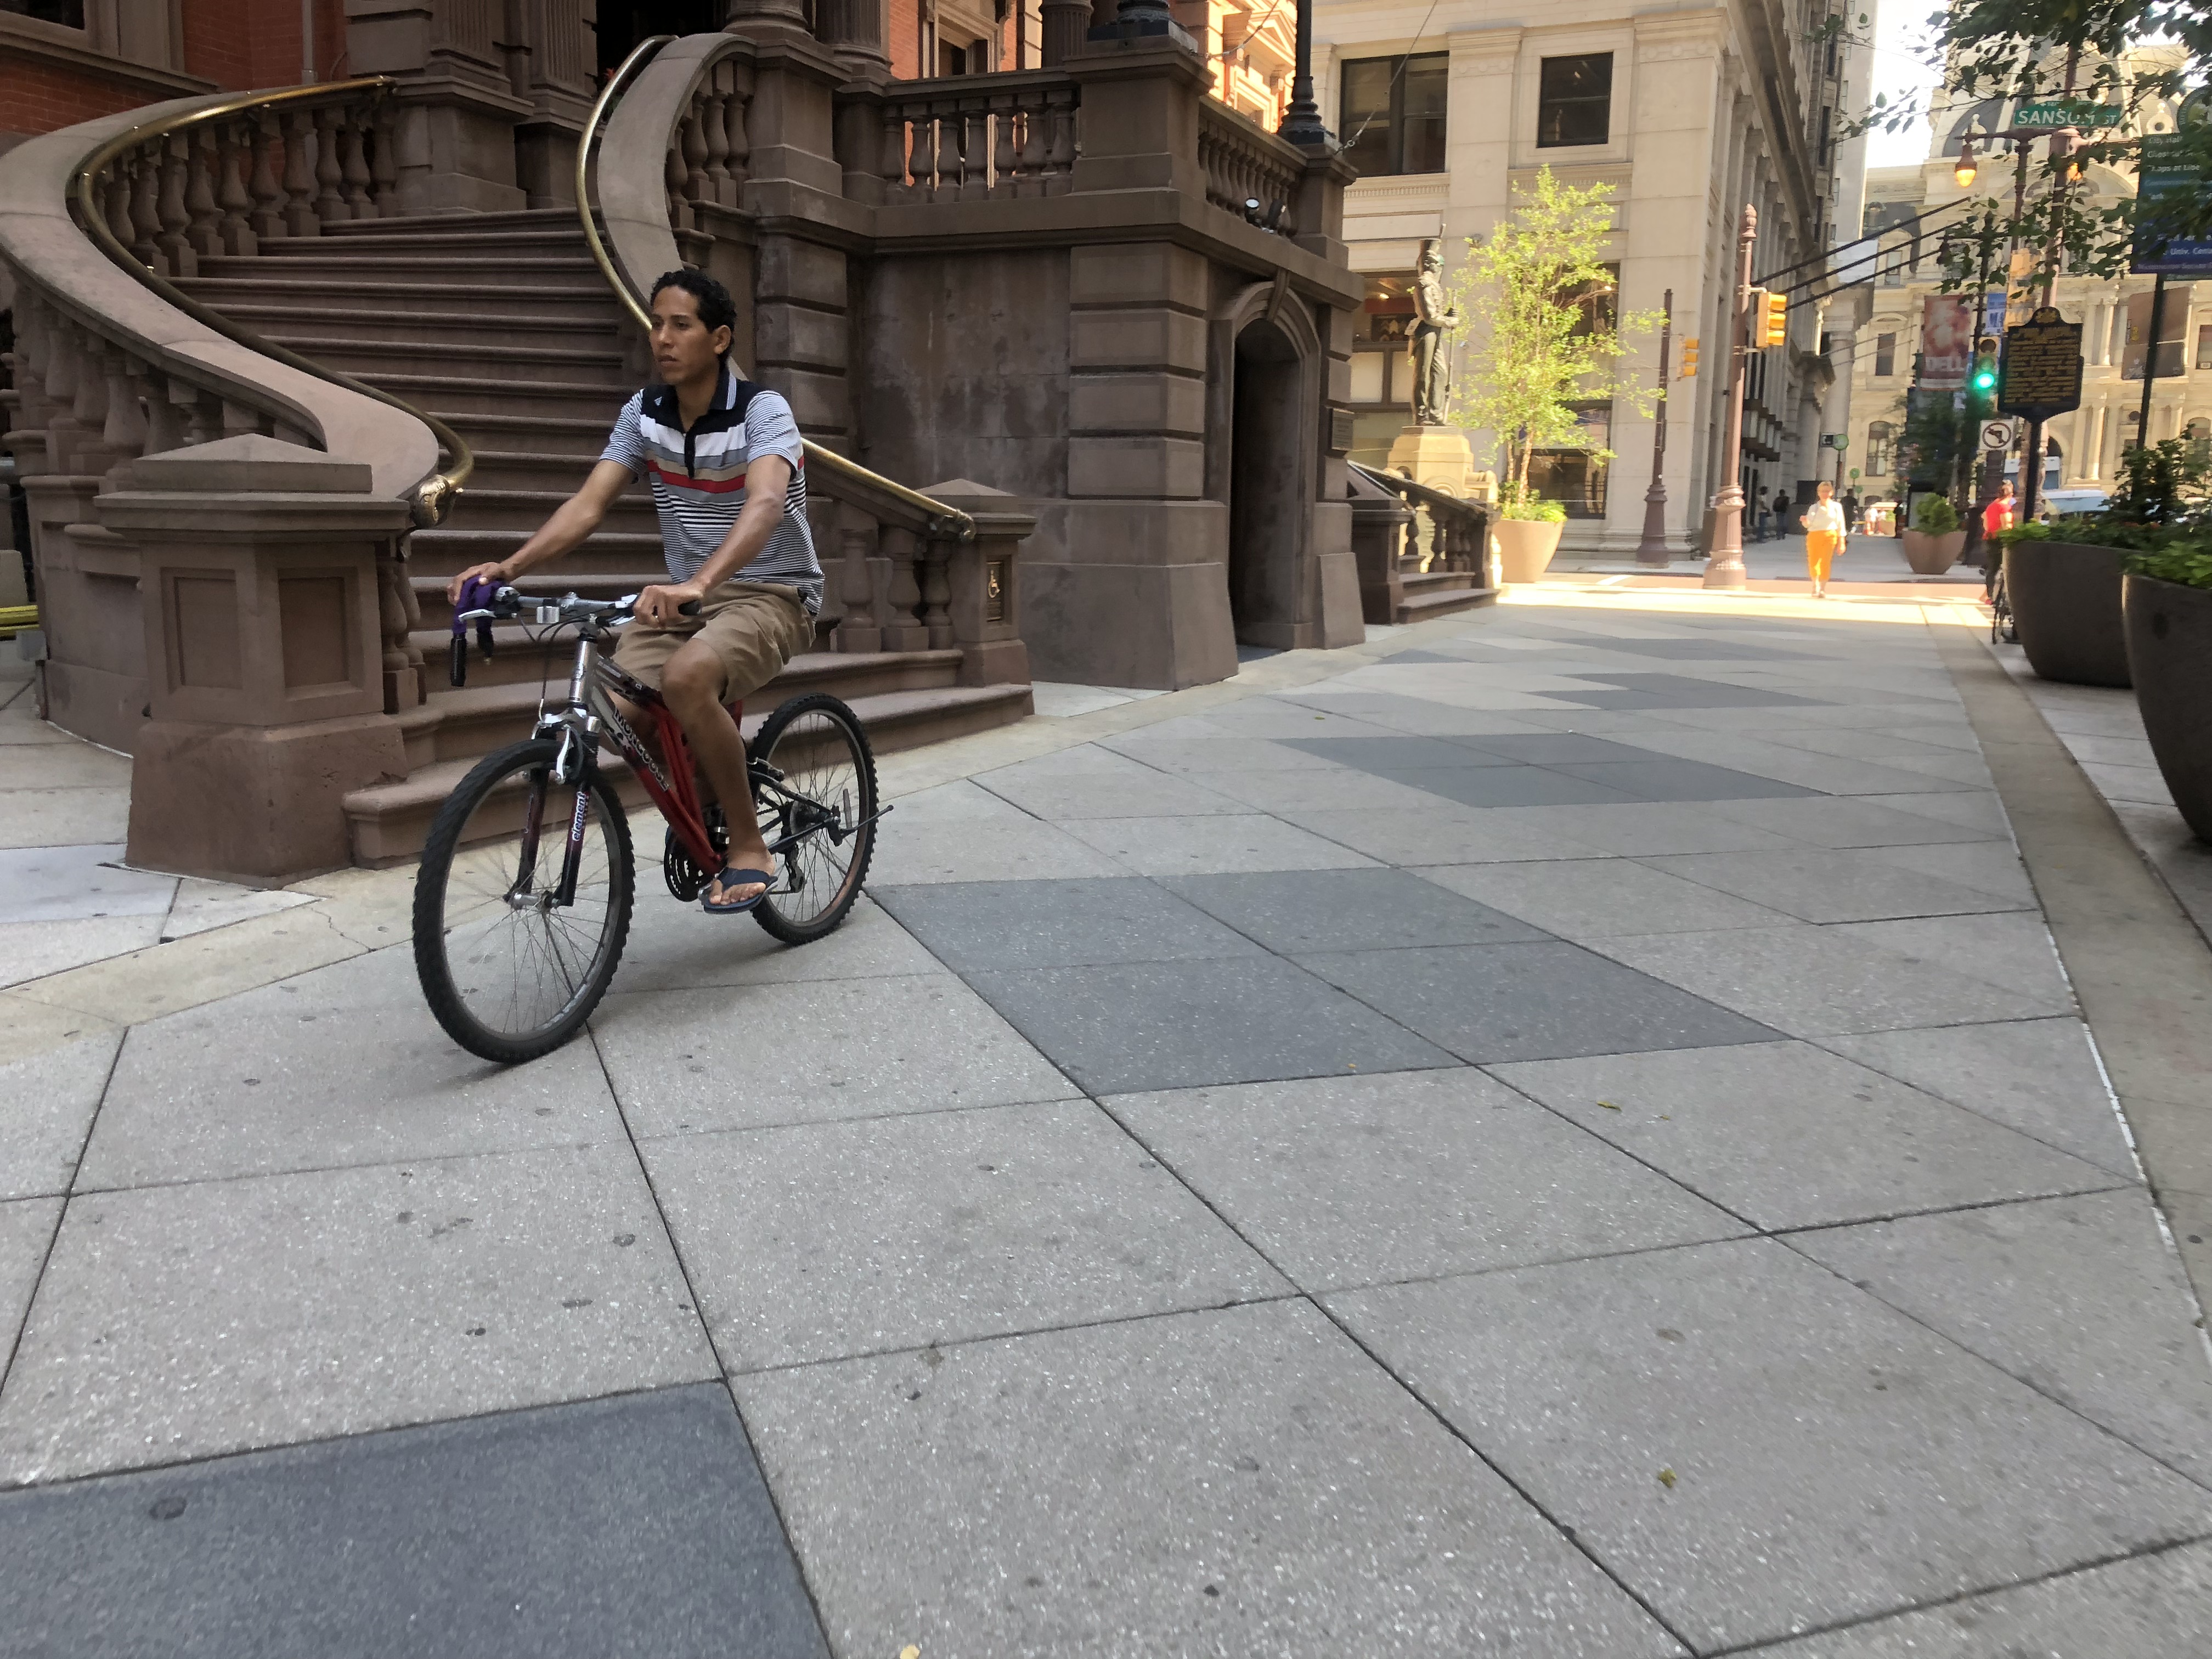 A cyclist rides along the sidewalk in front of the Union League on South Broad Street | Meir Rinde